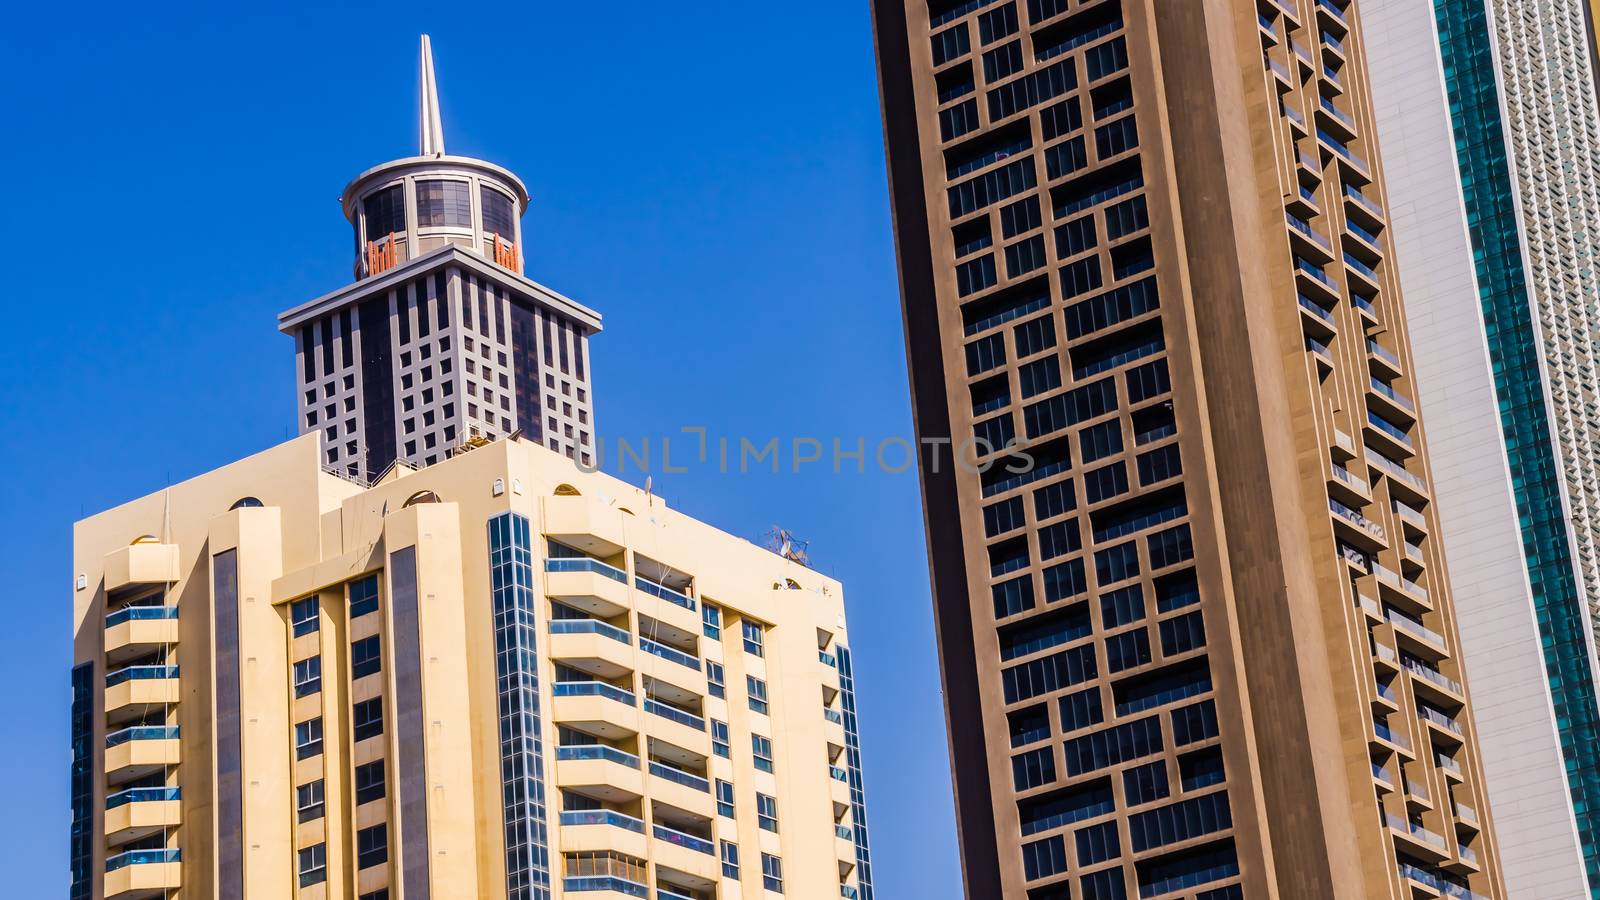 Stunning examples of architectural styles in Dubai downtown. Dubai has a rich collection of amazing buildings and structures of various styles.